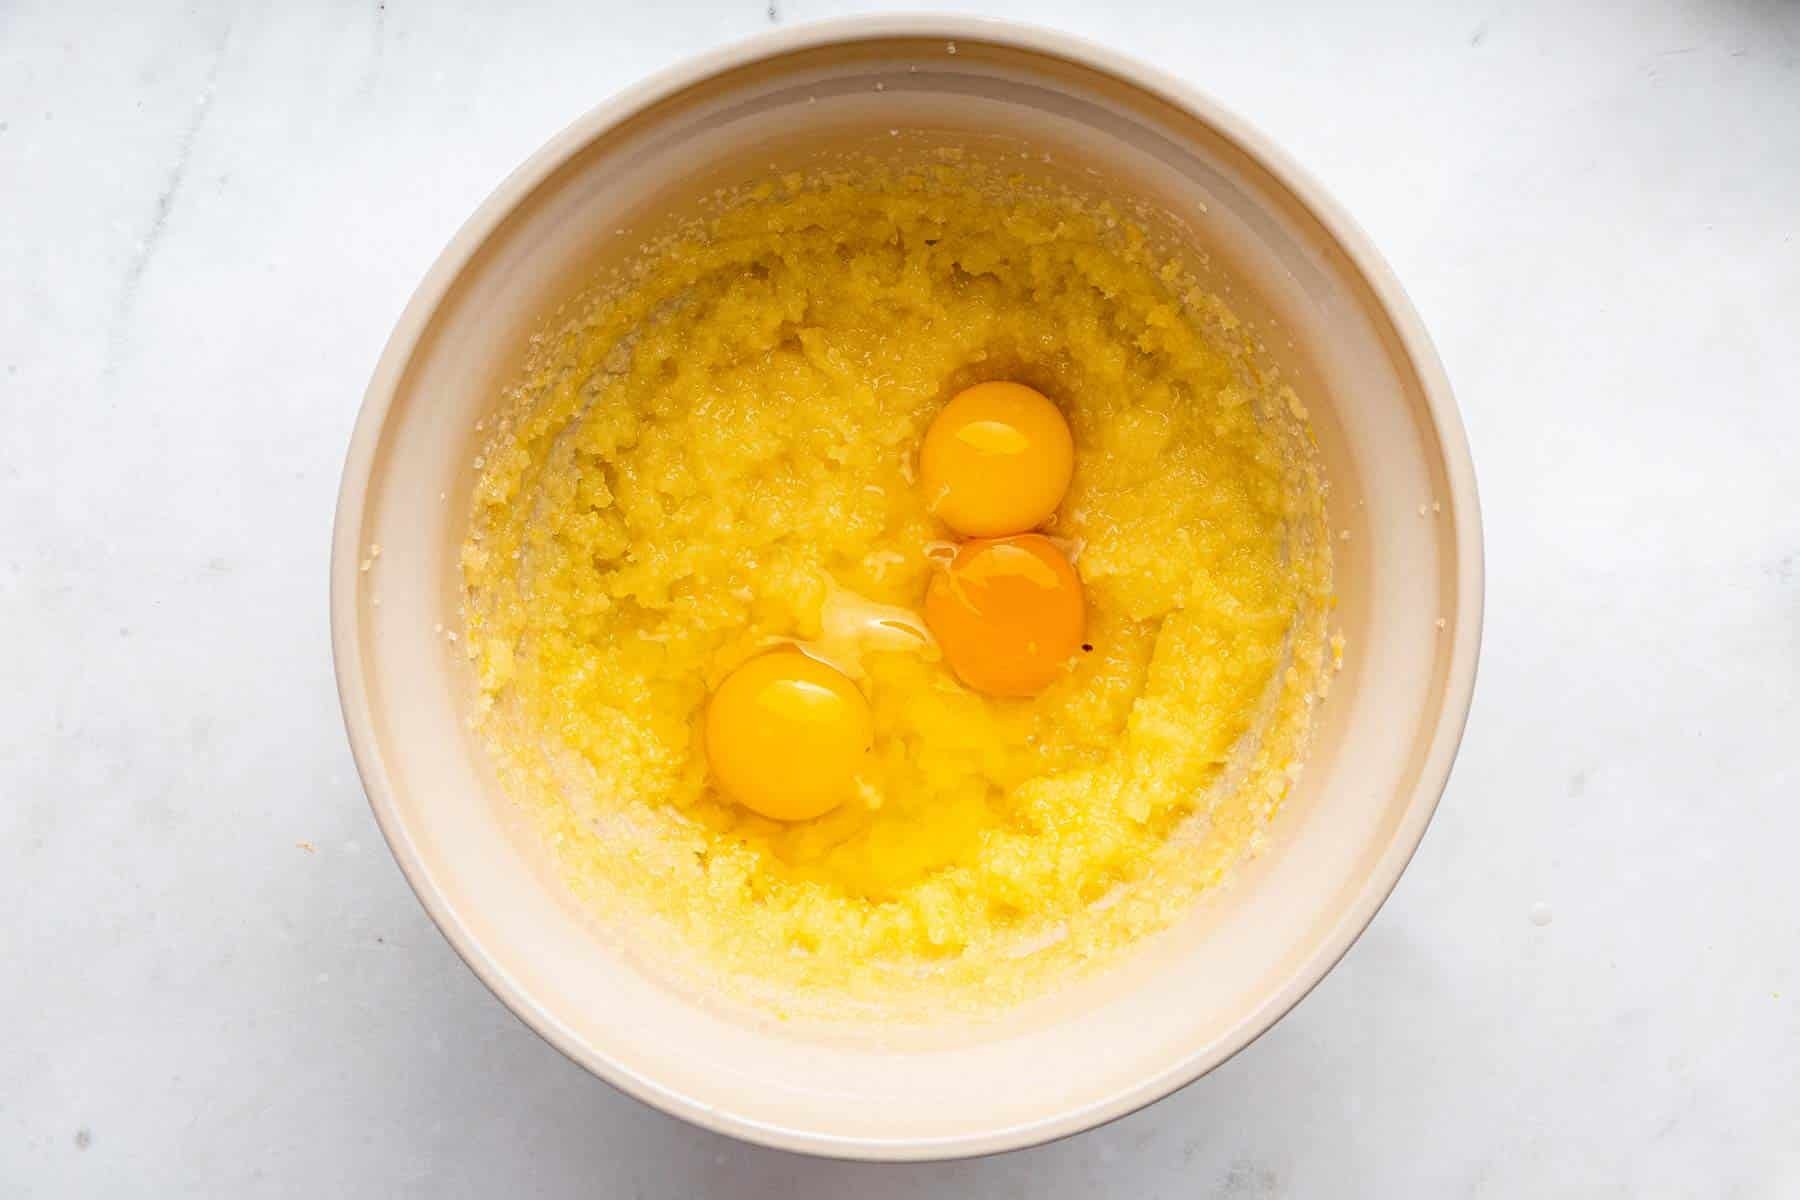 Yellow batter with three egg yolks on top of it.